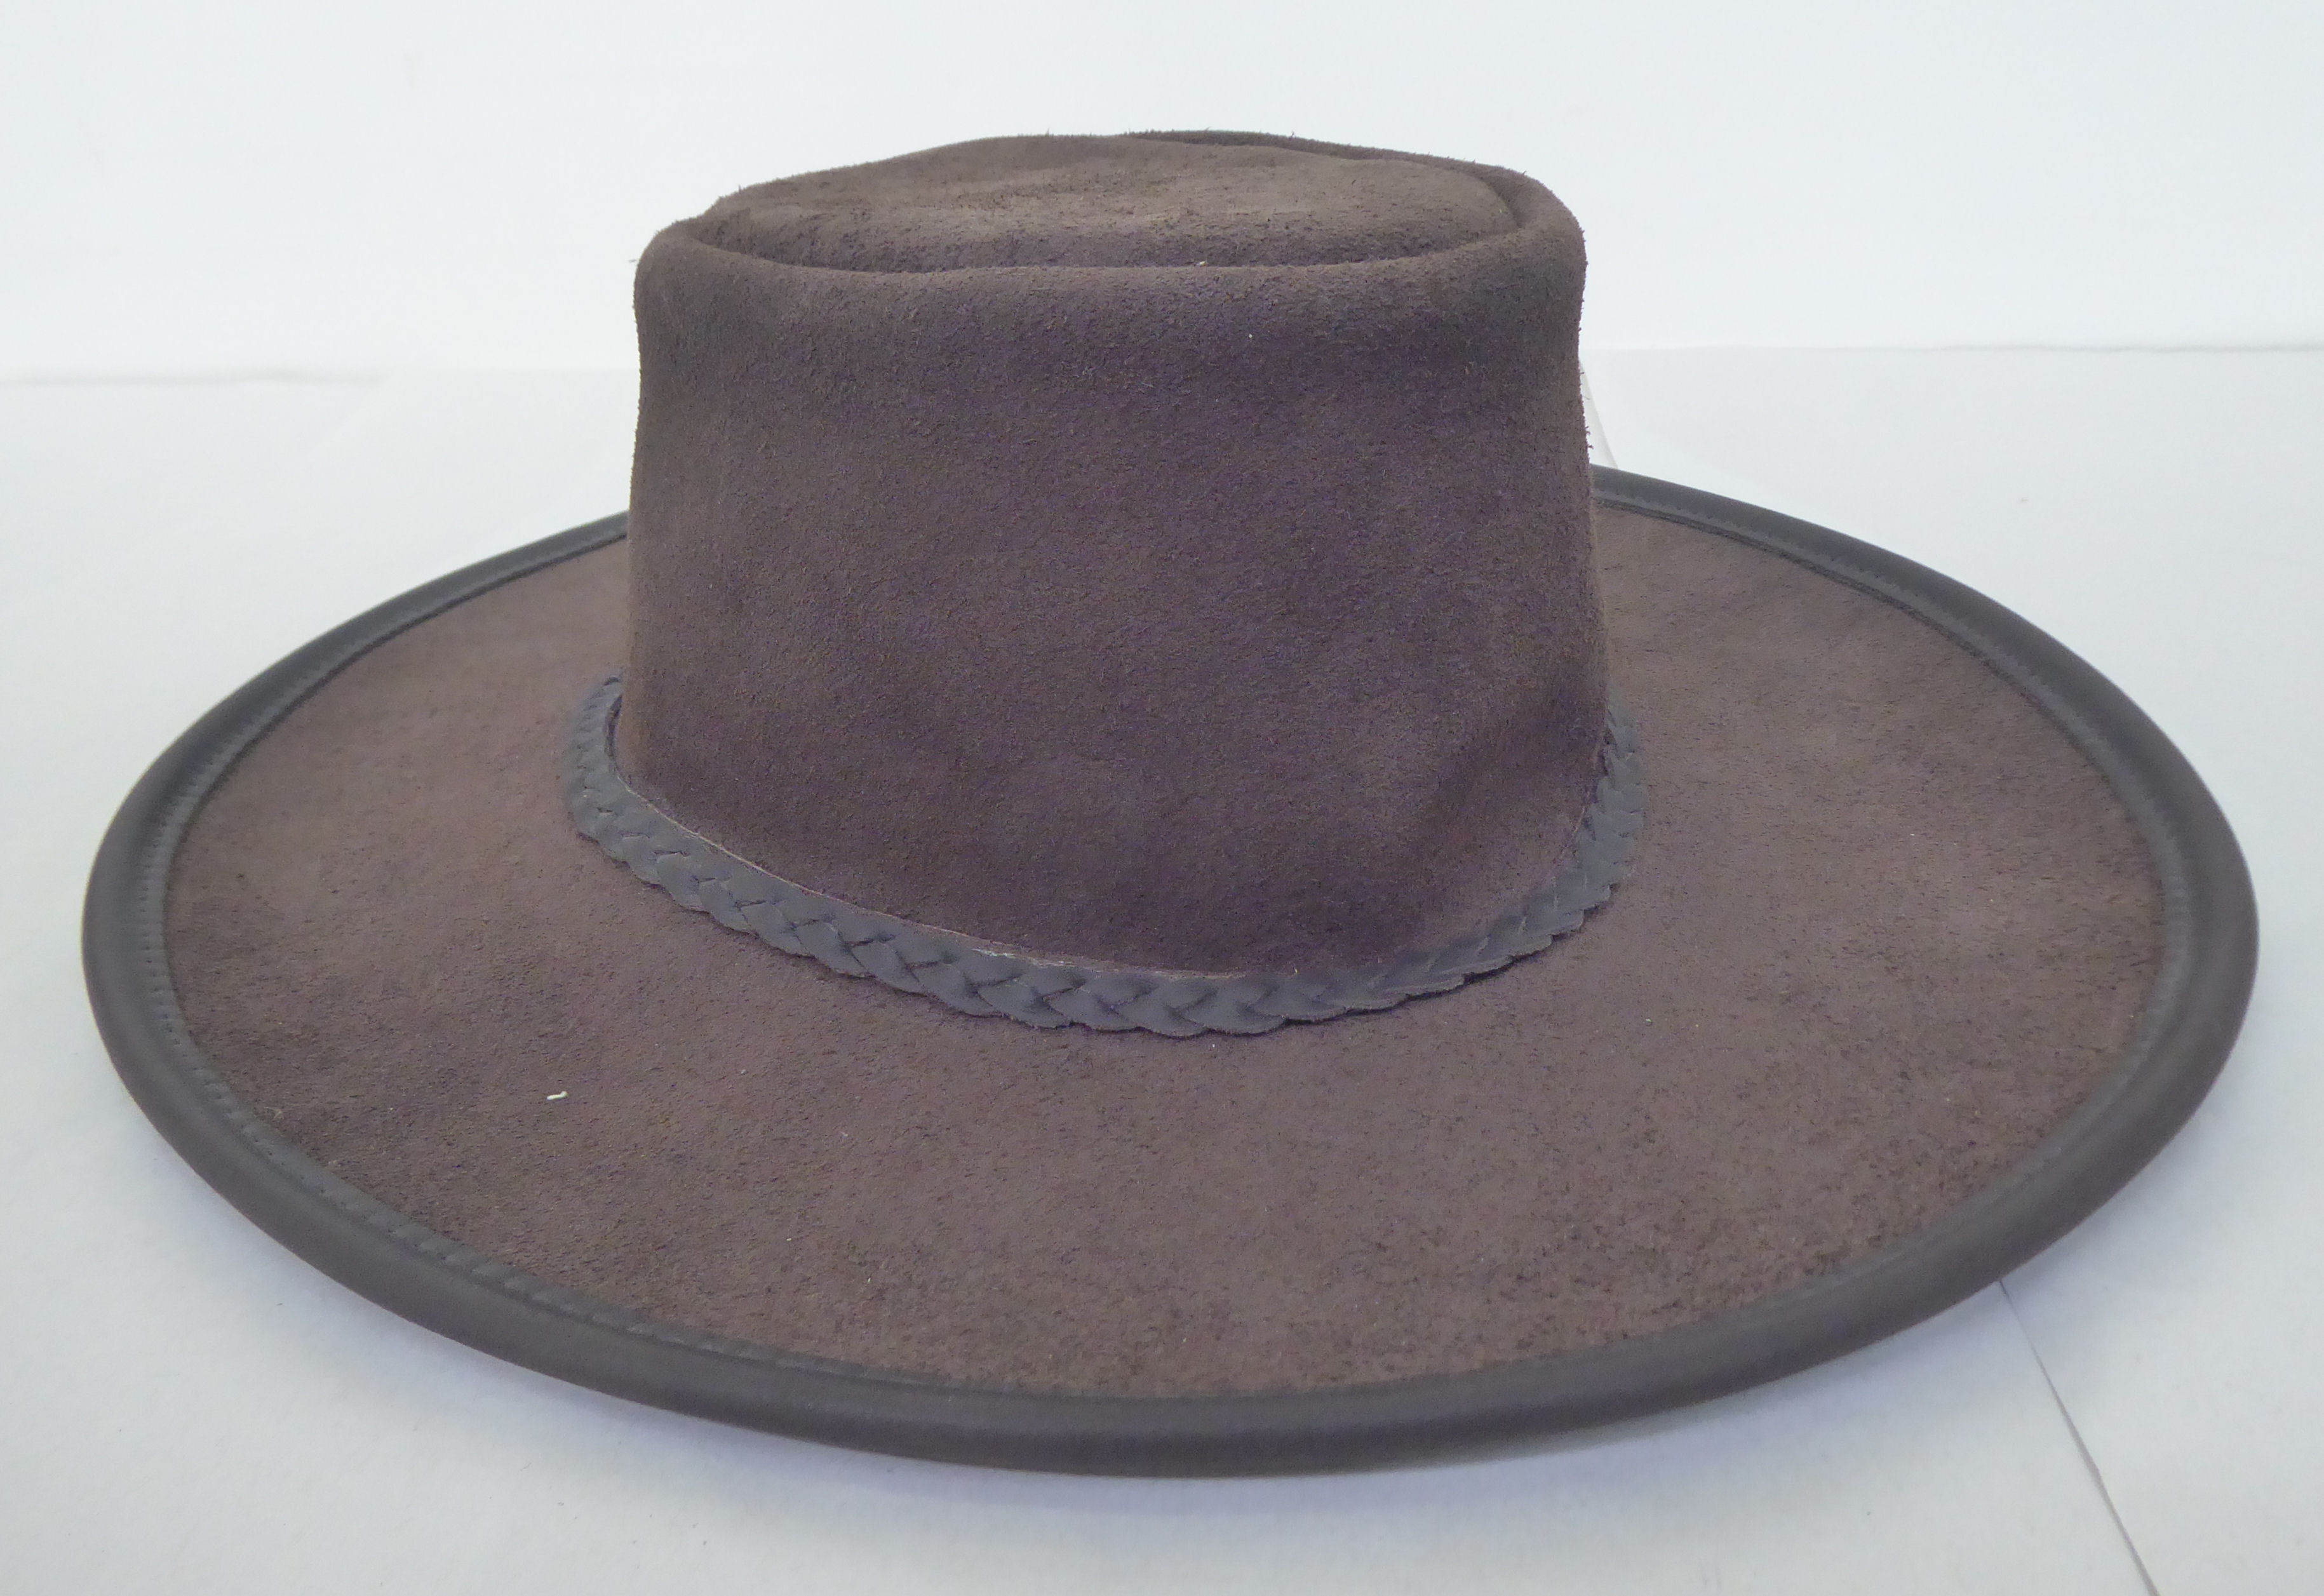 A Great Leather Hat by Sleepy Hollow, in chocolate brown hide  size L